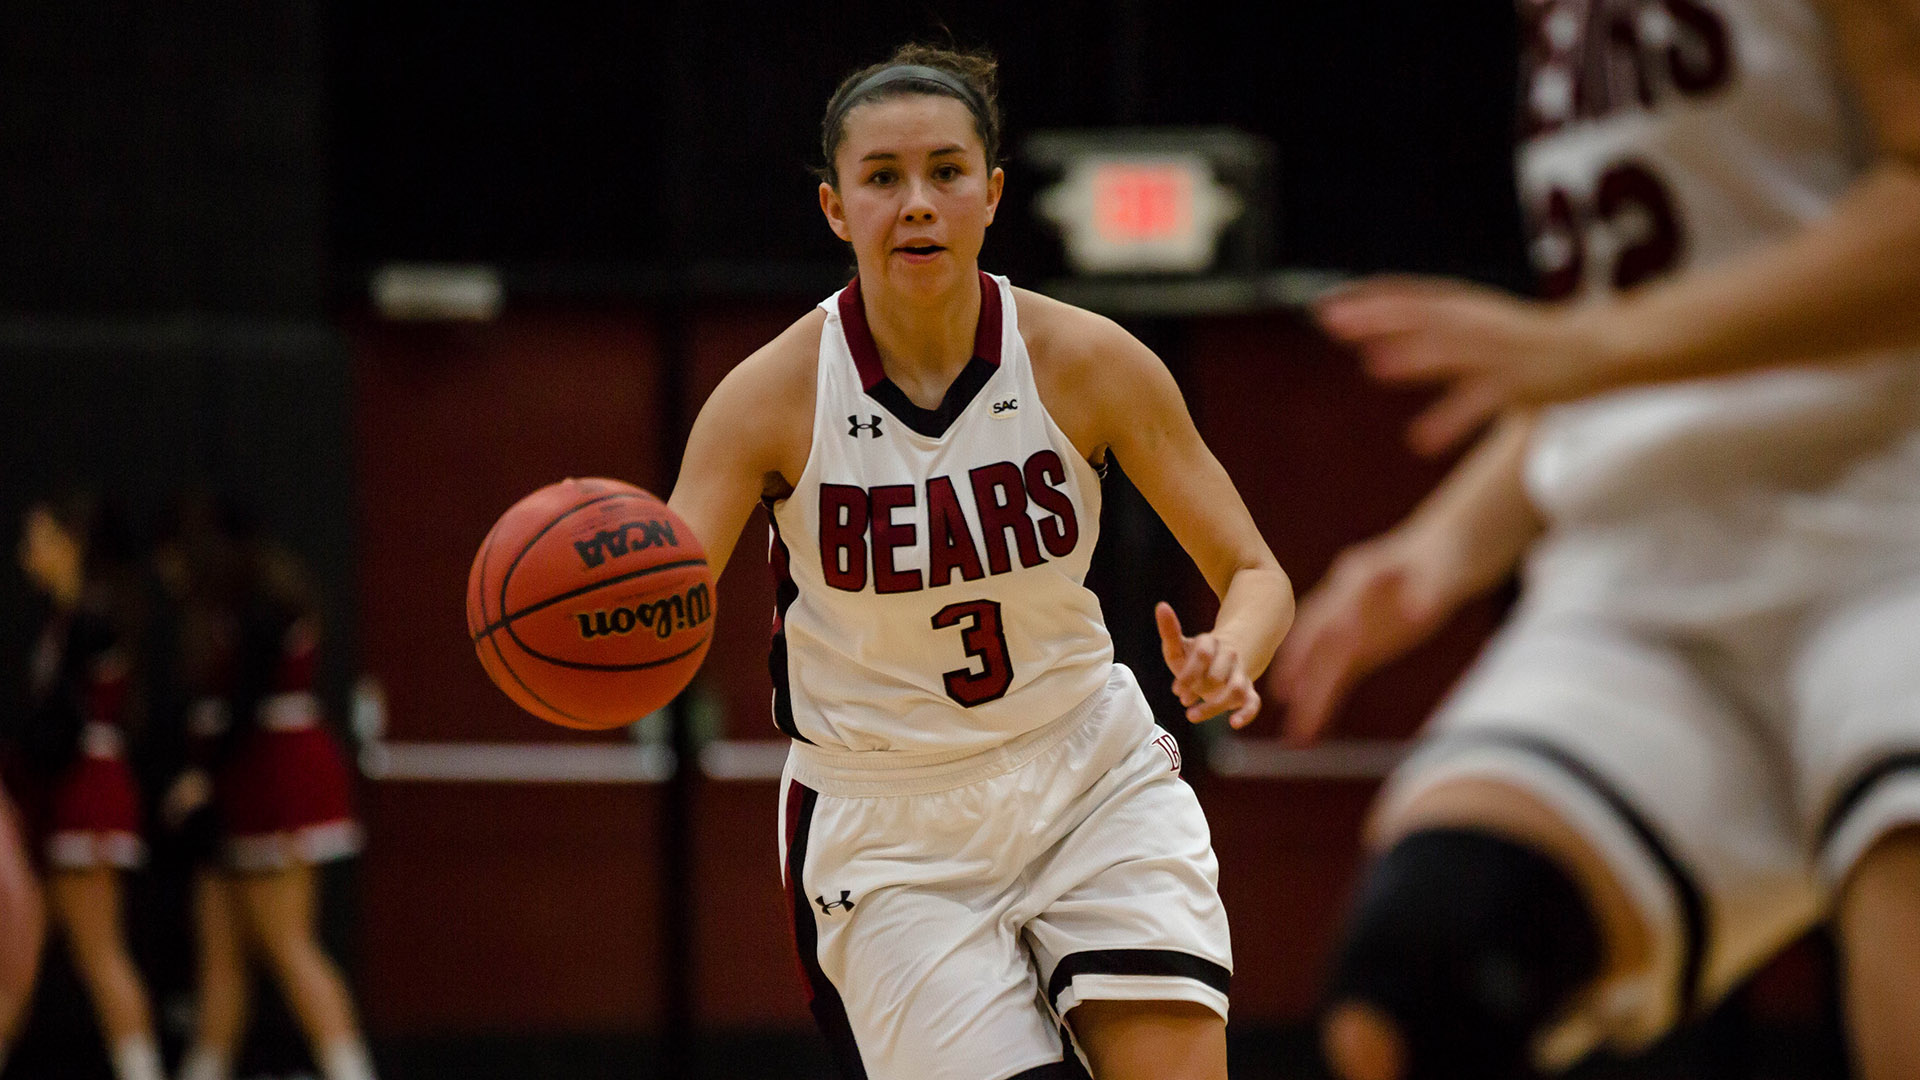 Kendall Toineeta (Eeastern Cherokee) Goes for 25 Points but Bears Fall at Lincoln Memorial